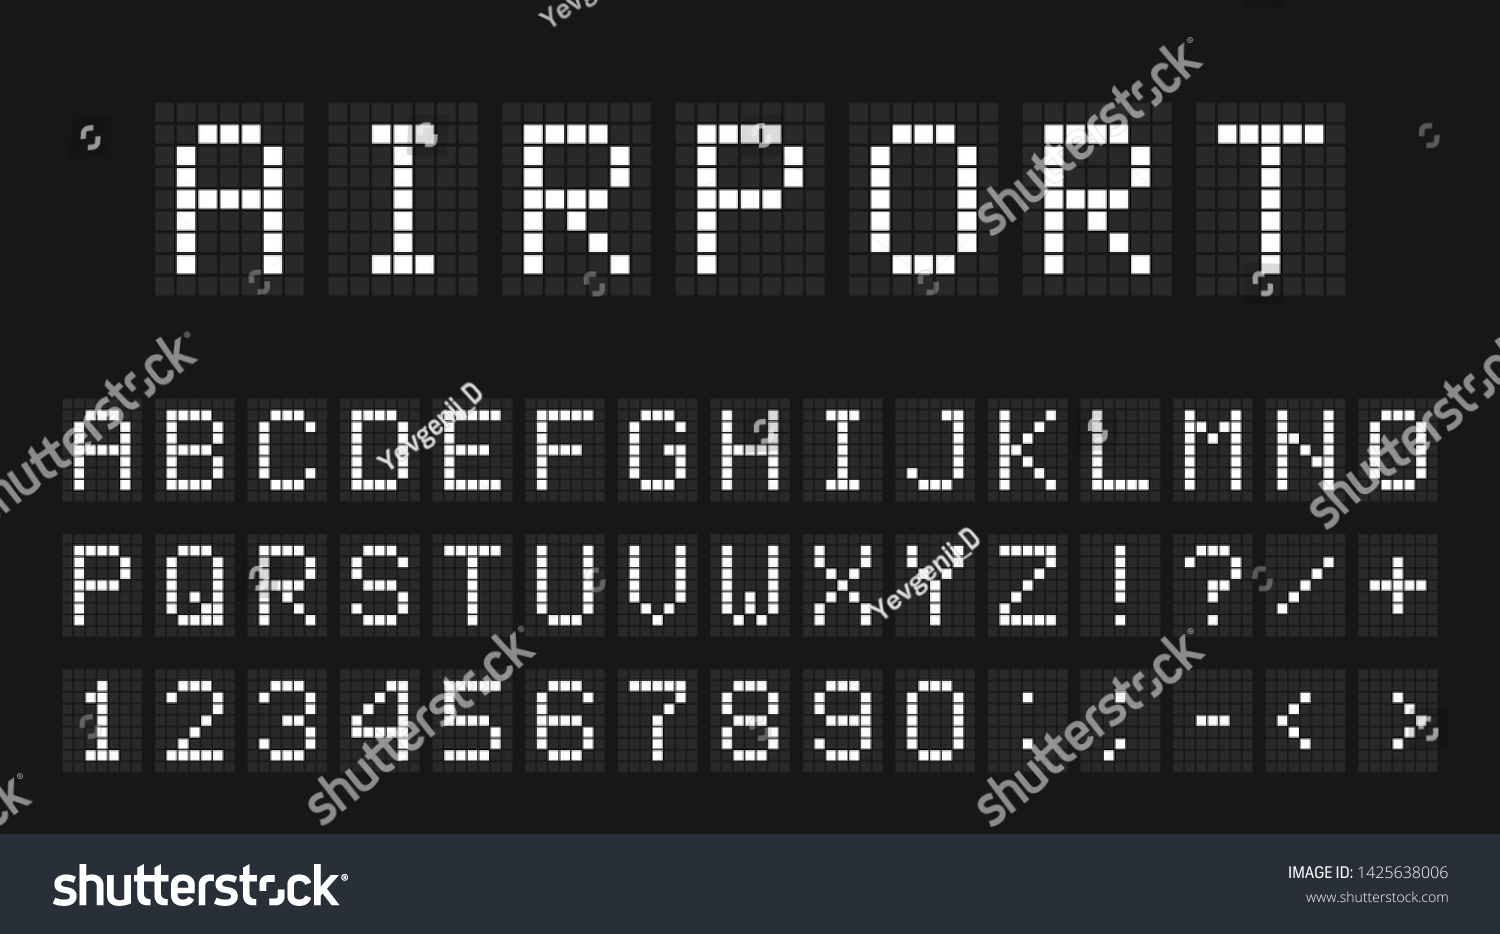 SVG of Led digital font, letters and numbers. English alphabet in digital screen style. Led digital board concept for airport, sport matches, billboards and advertising. Vector svg